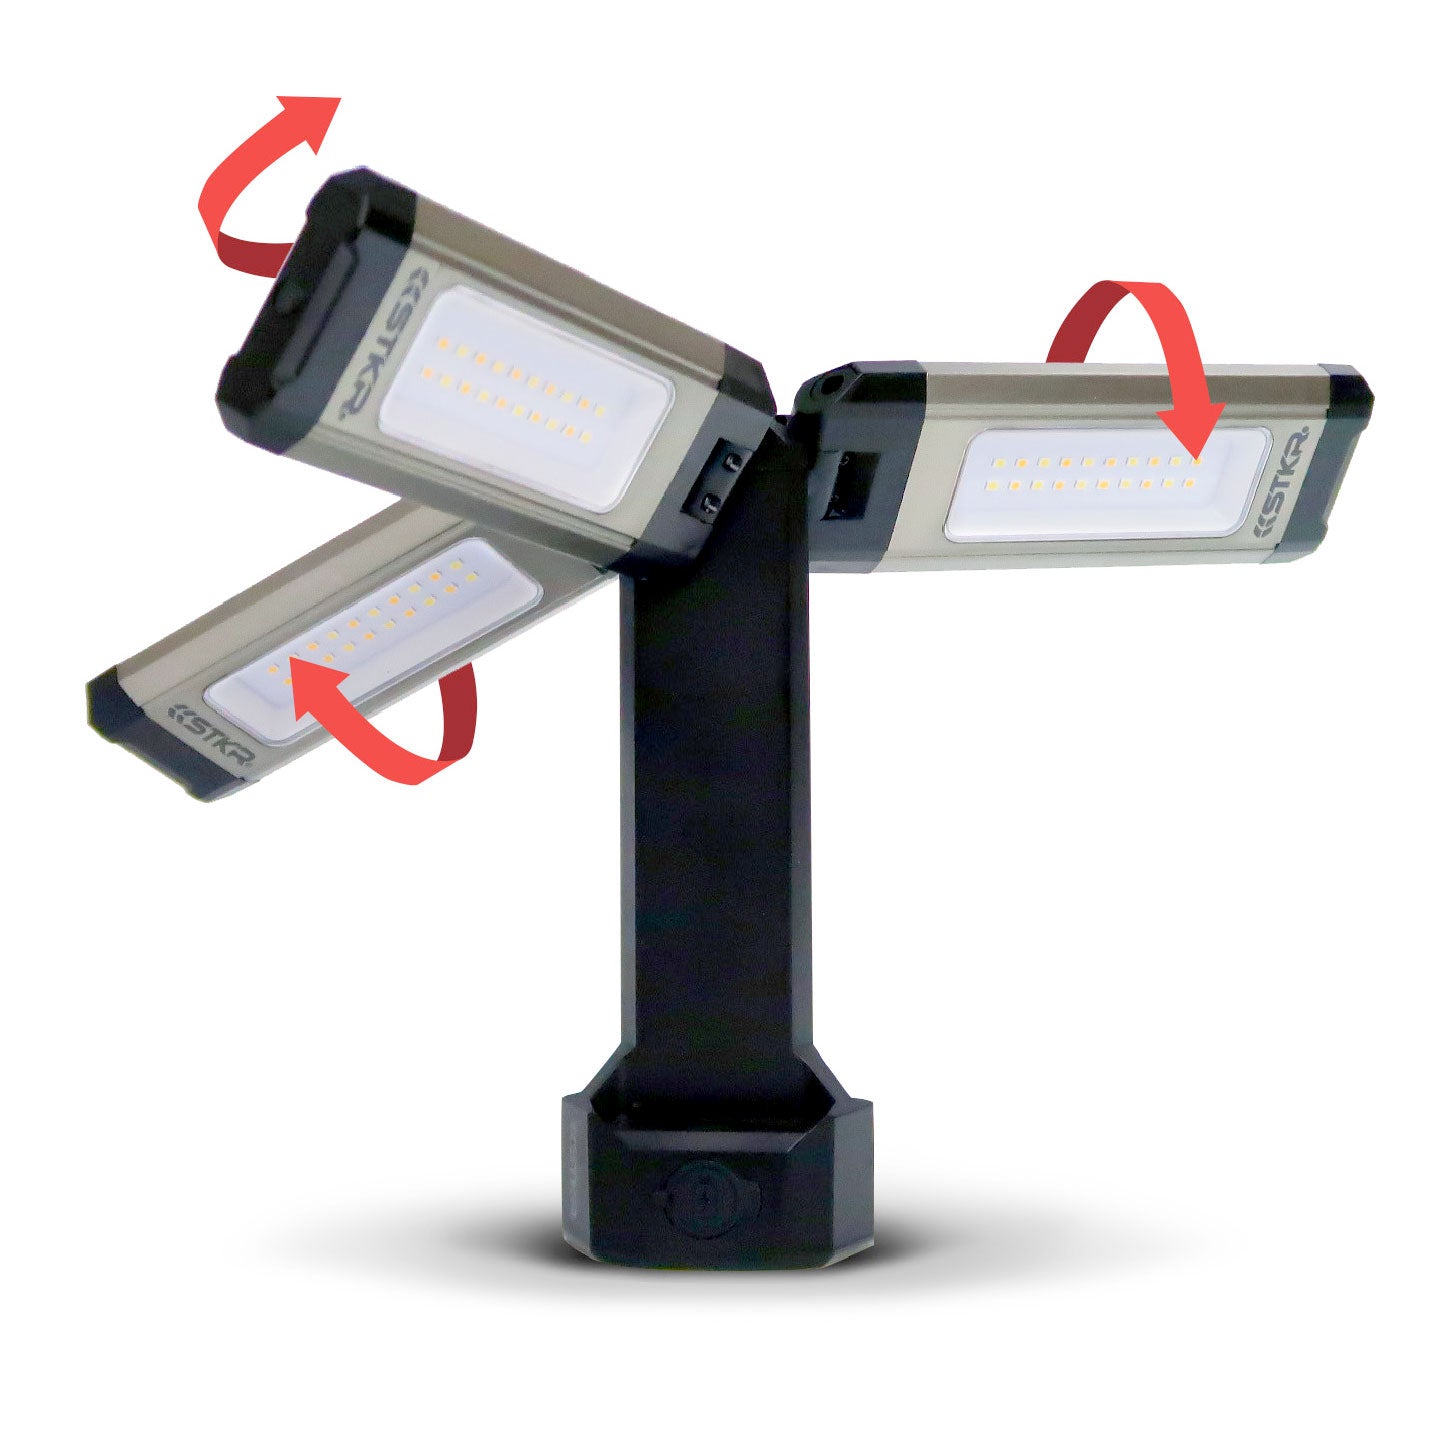 TRi-Mobile Area Work Light - Rechargeable Shoplight with Triple Pivoting LED Light Heads by STKR Concepts - main image